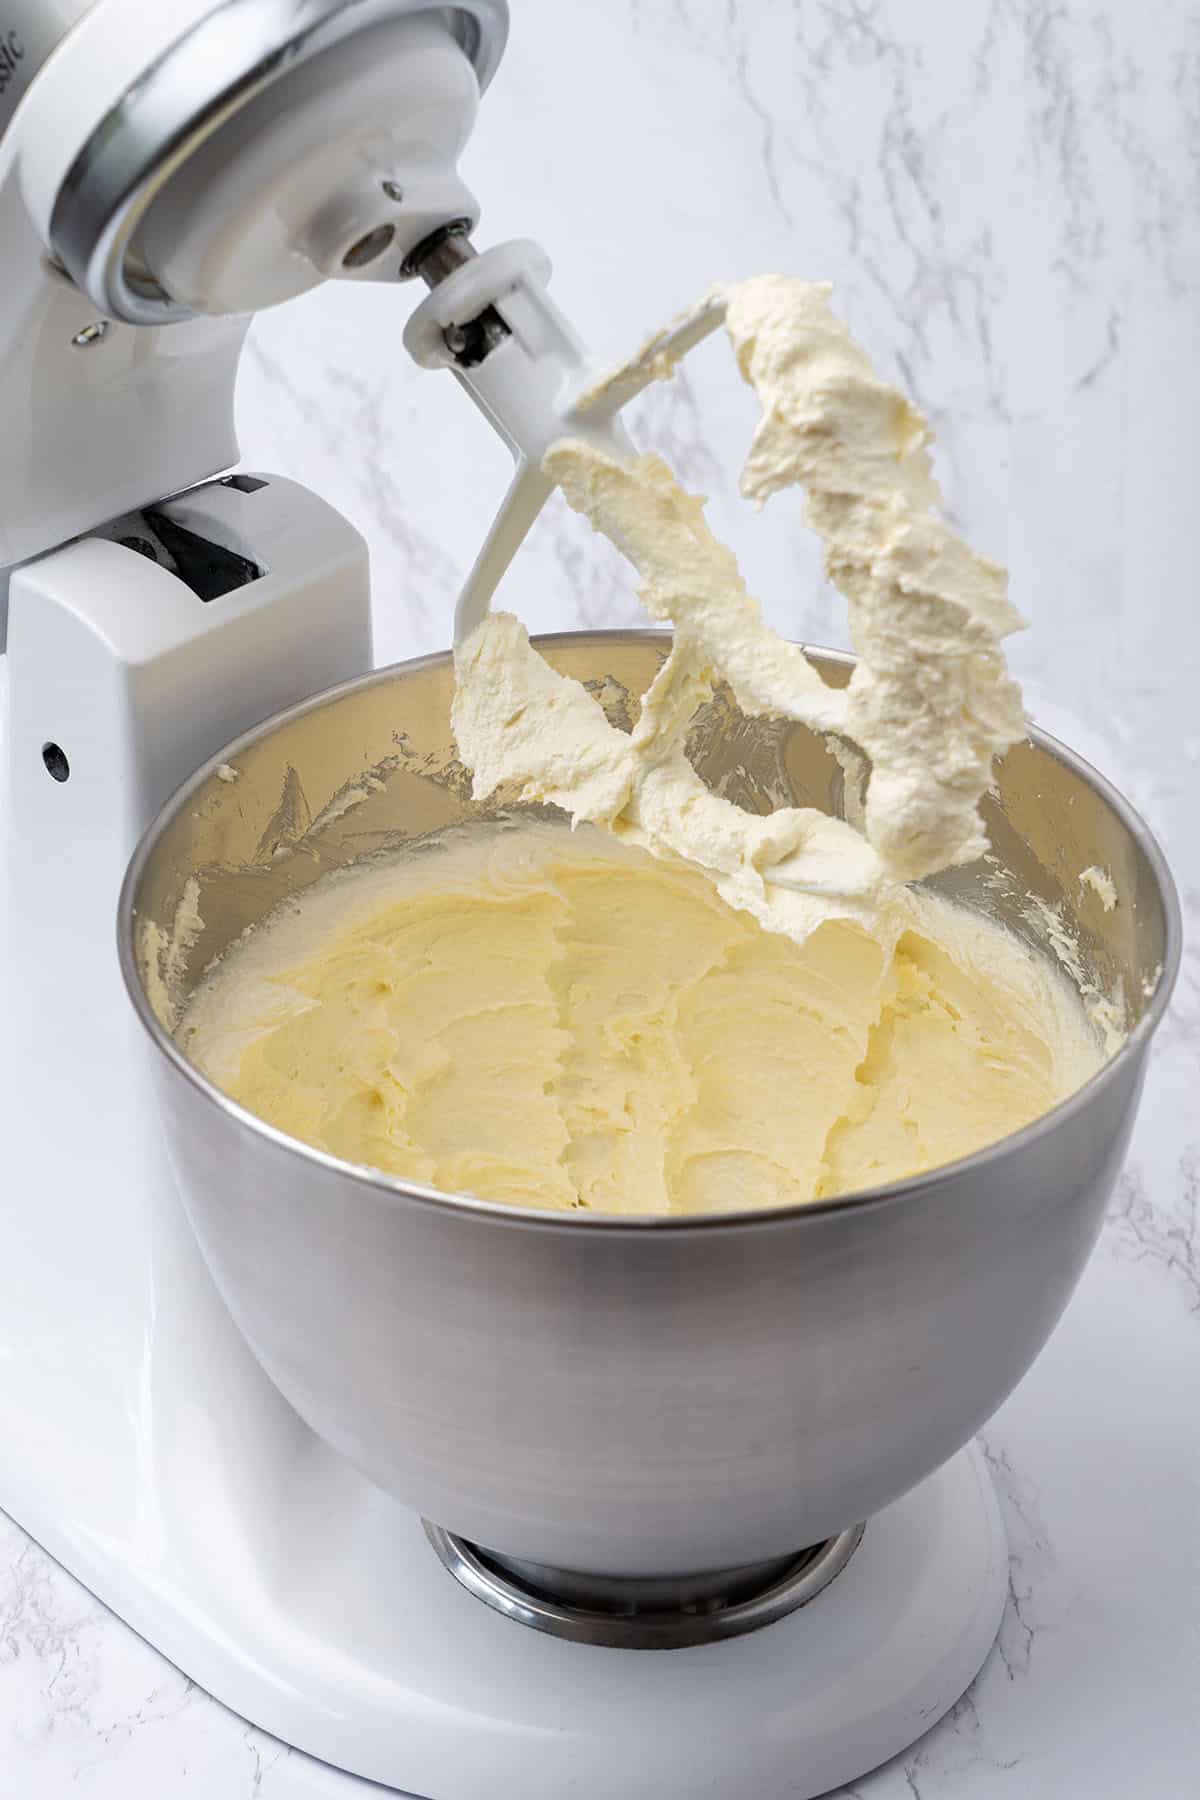 Ready made cream in stand mixer.